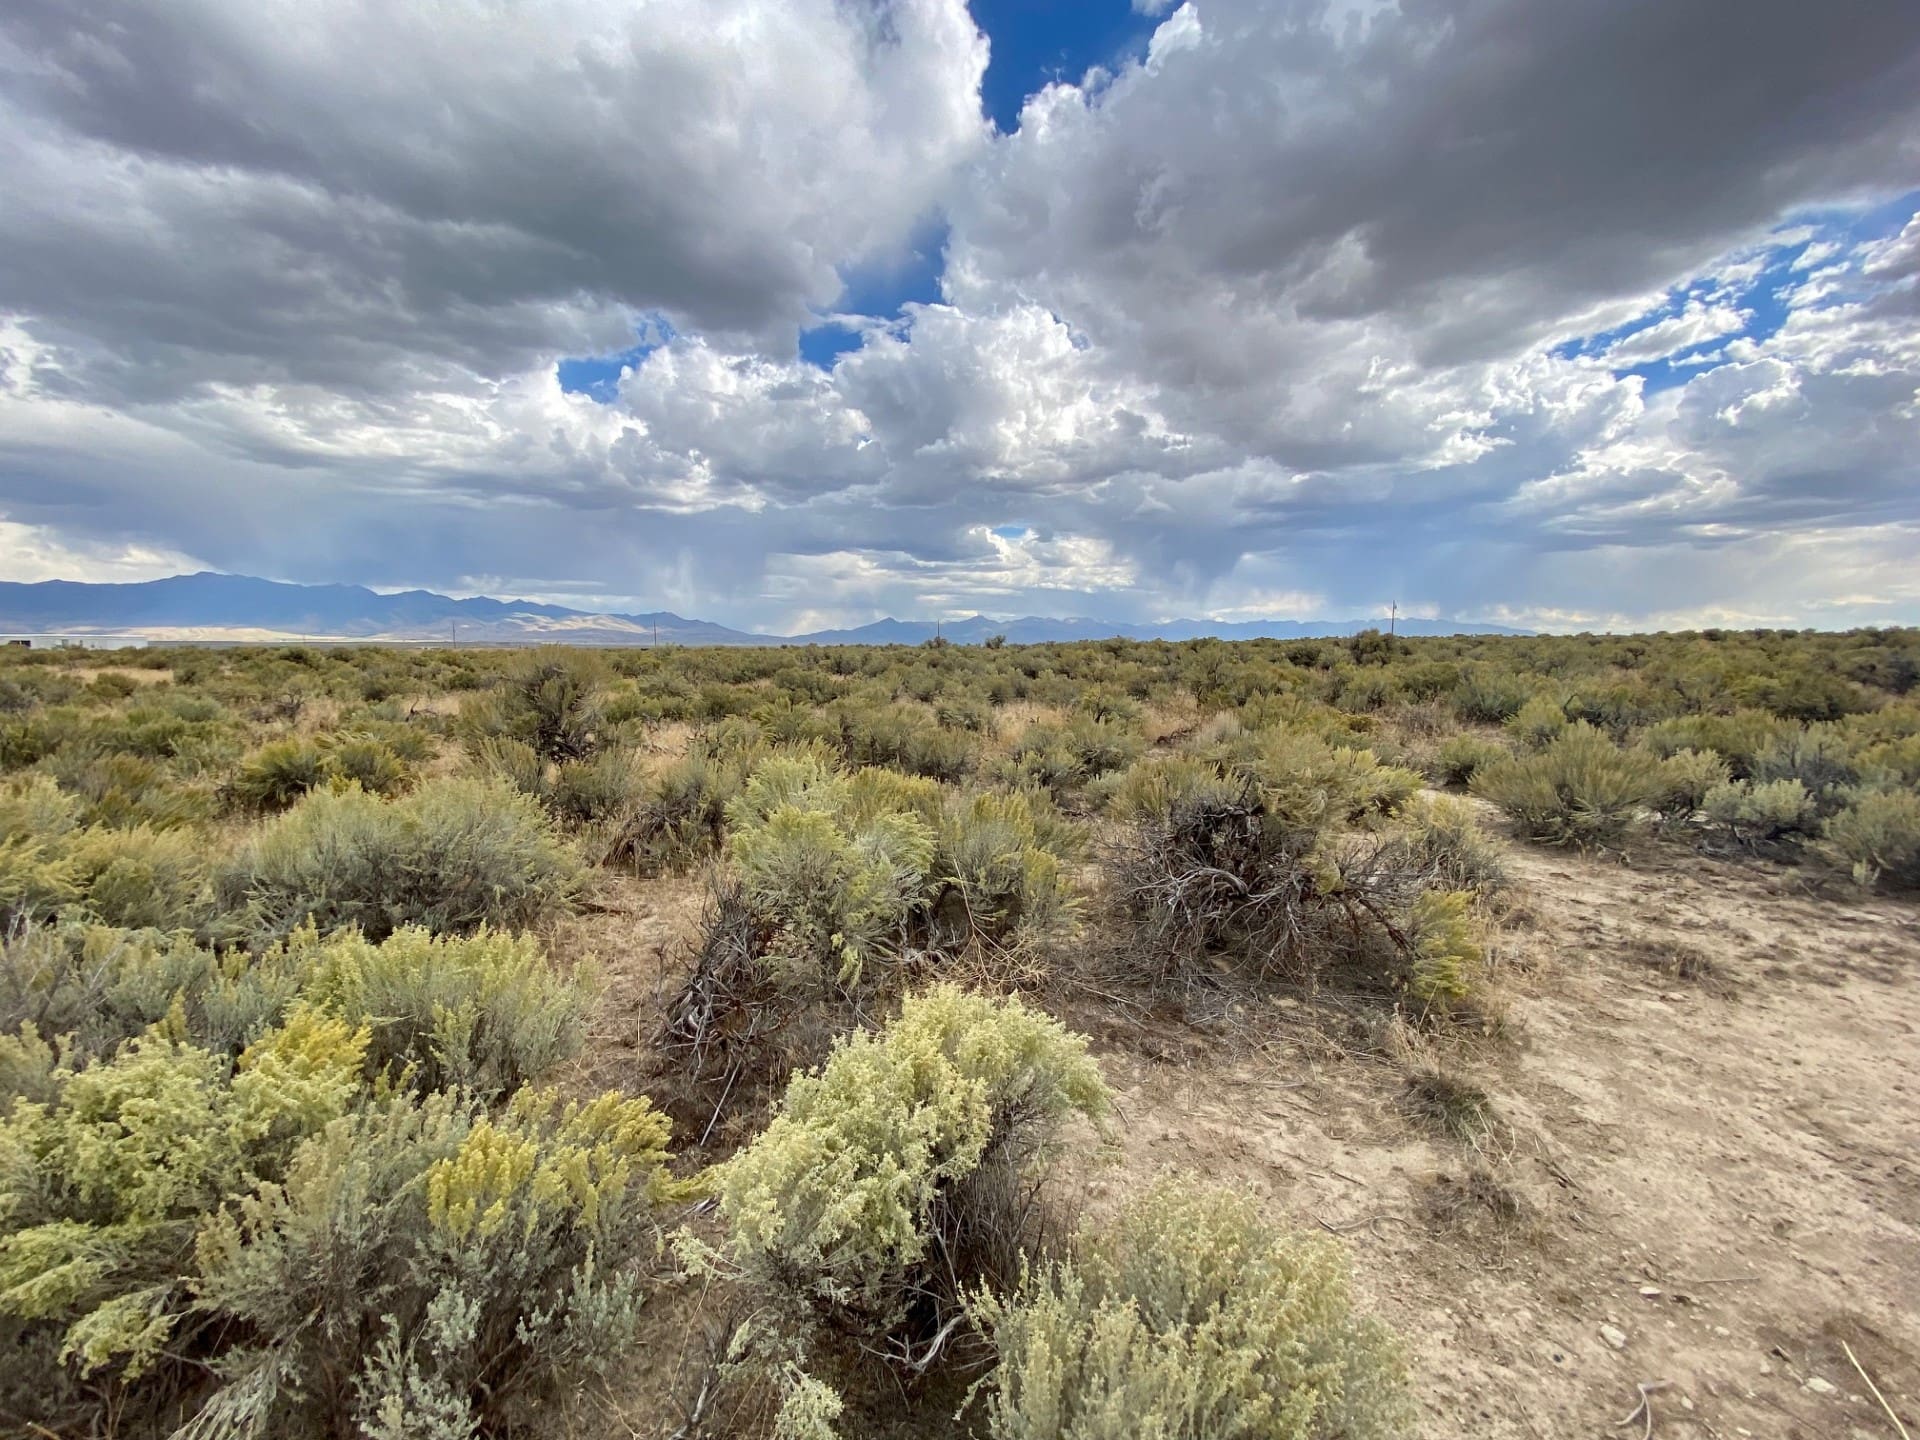 1.26 Acre Ranchette Elko Nevada With Fabulous Views Of The Ruby Mountains & Humboldt Peak 11,025 Ft photo 27